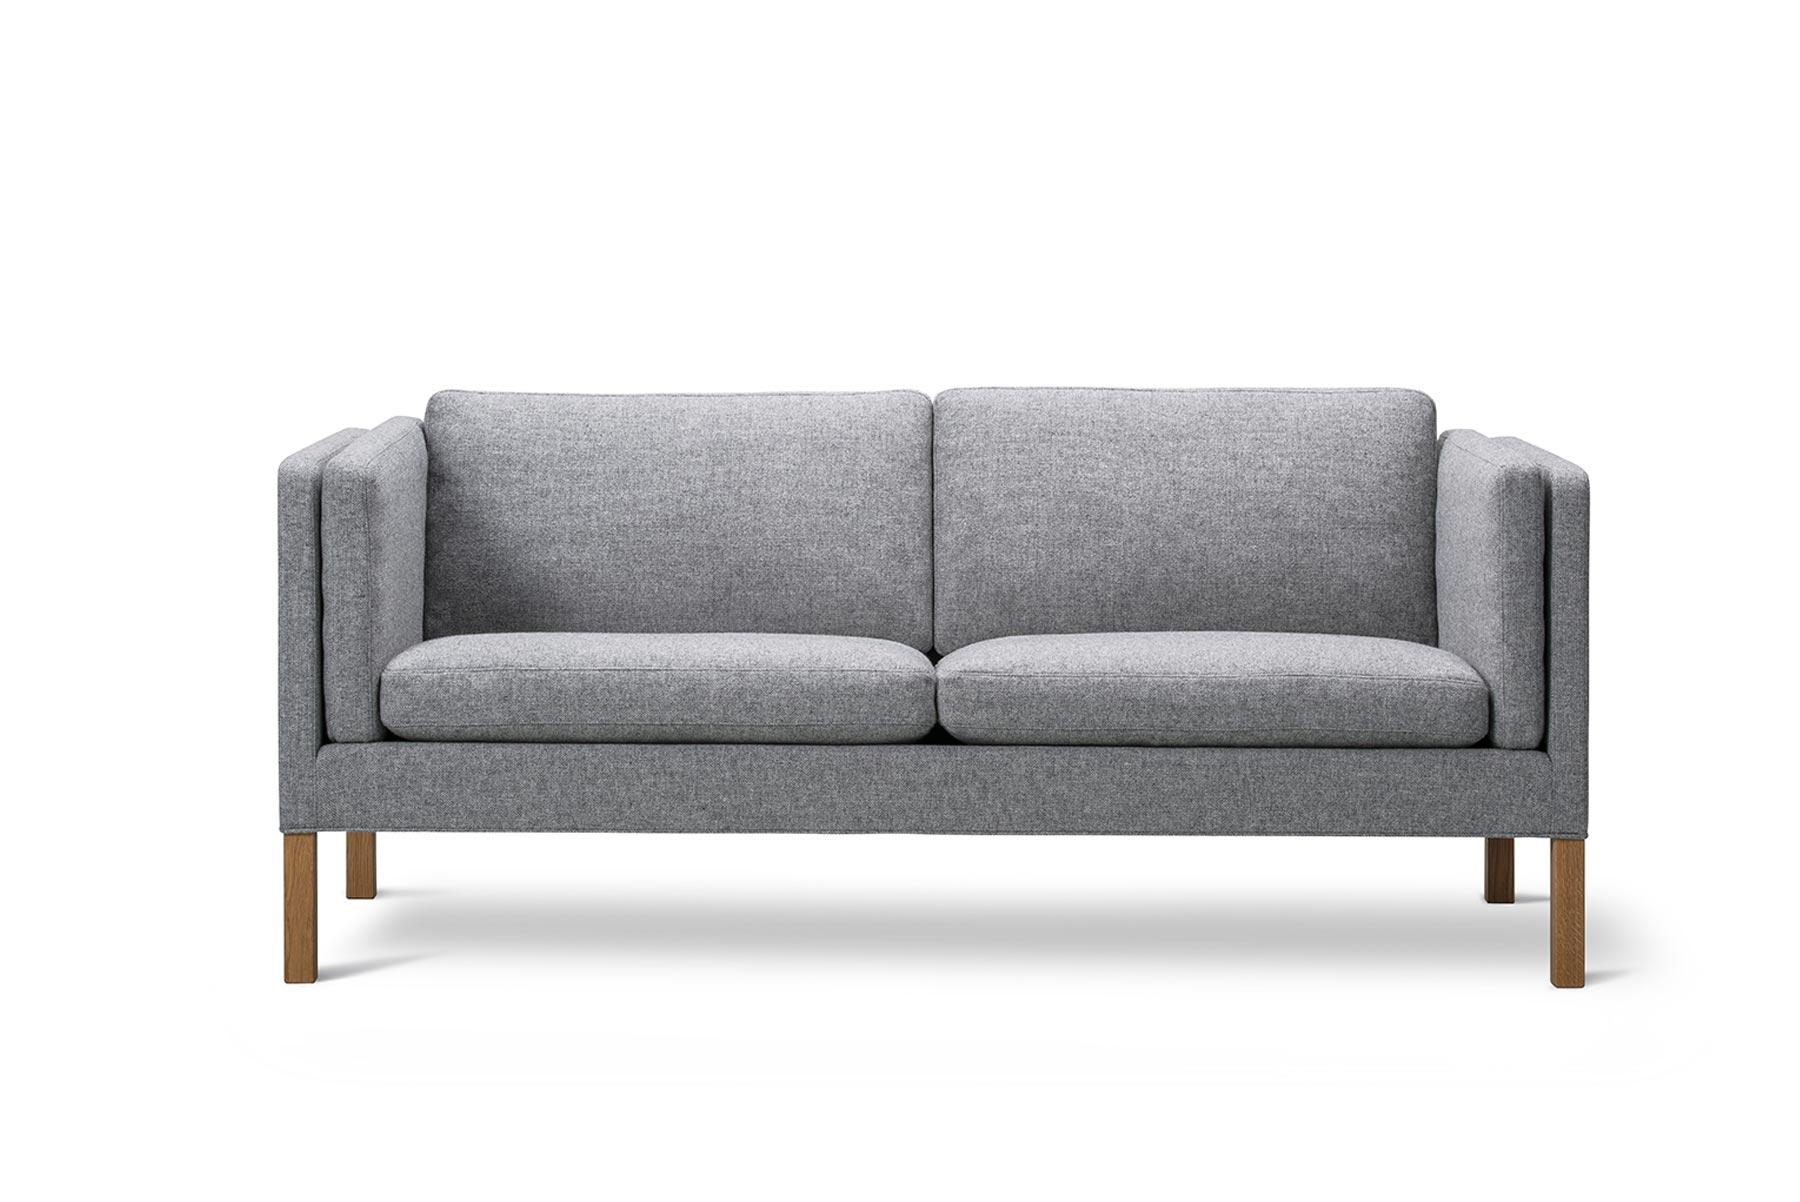 The 2335 sofa was designed by Børge Mogensen’s son, architect Peter Mogensen, as a completion of his father’s last furniture series. The extended width of the cushions softens the formality of the design in a respectfully unpredictable way.